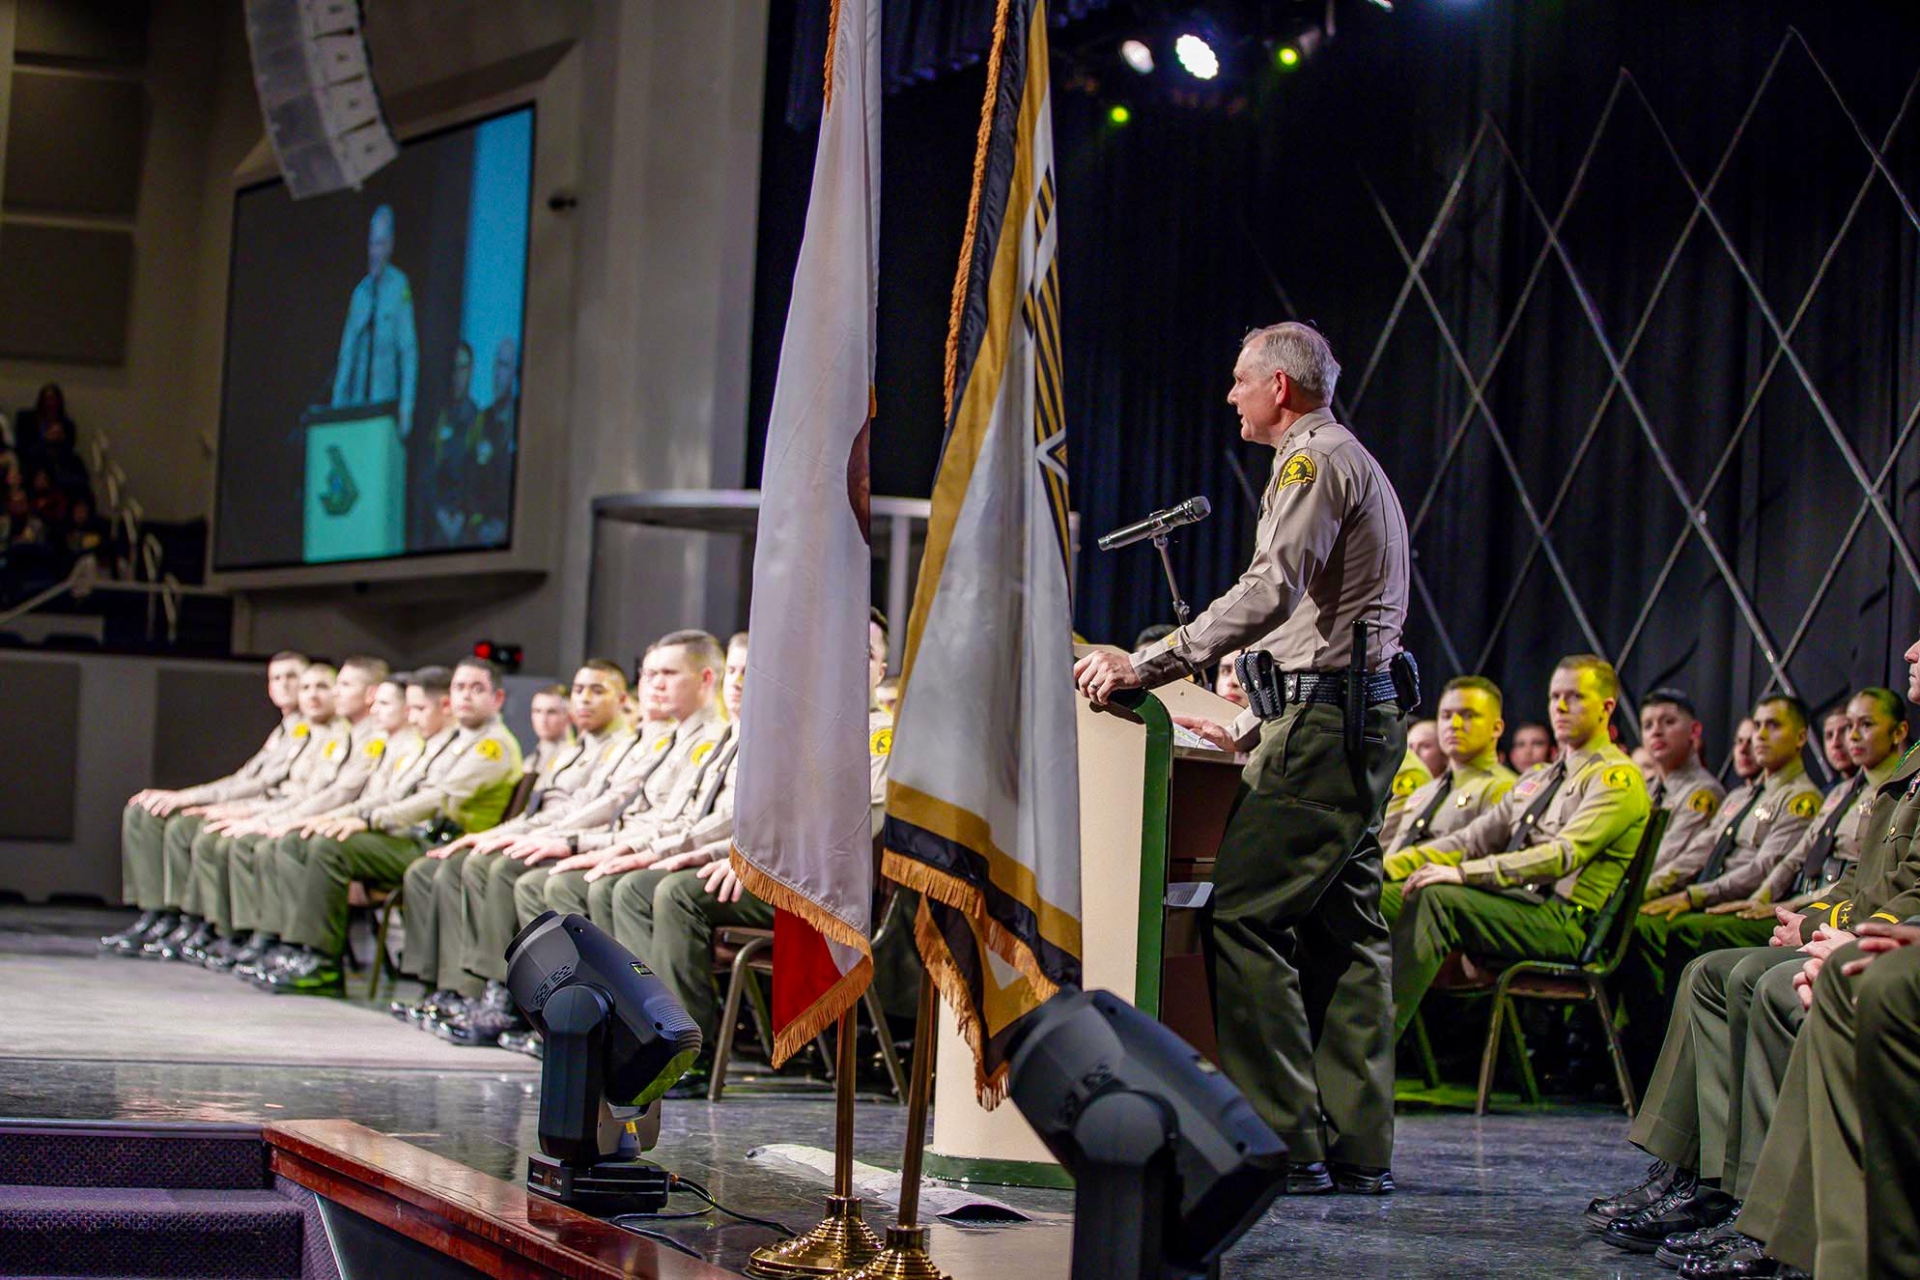 Sheriff Shannon Discus speaks at the San Bernardino County Sheriff’s Office: Basic Law Enforcement Academy Graduation in March.